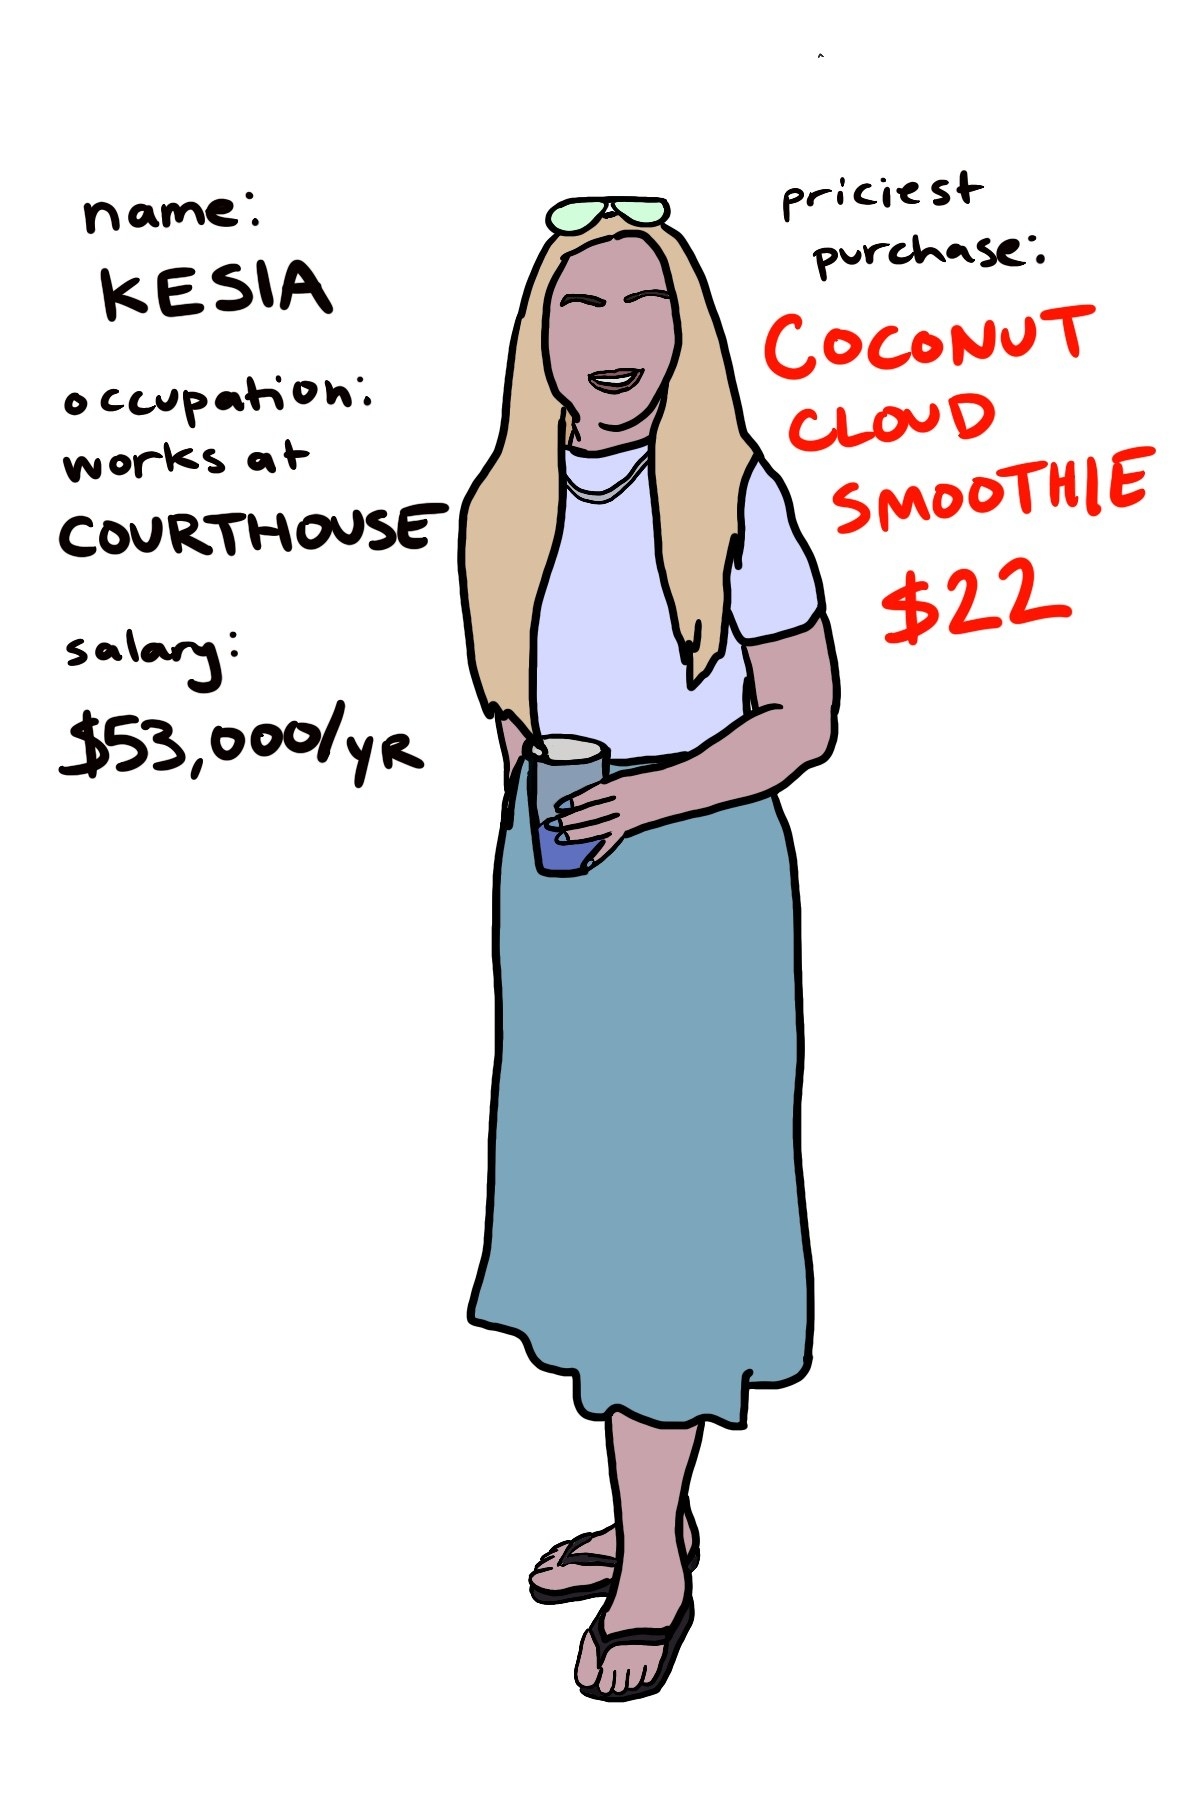 Customer with a $22 coconut cloud smoothie and earns $53k at a courthouse